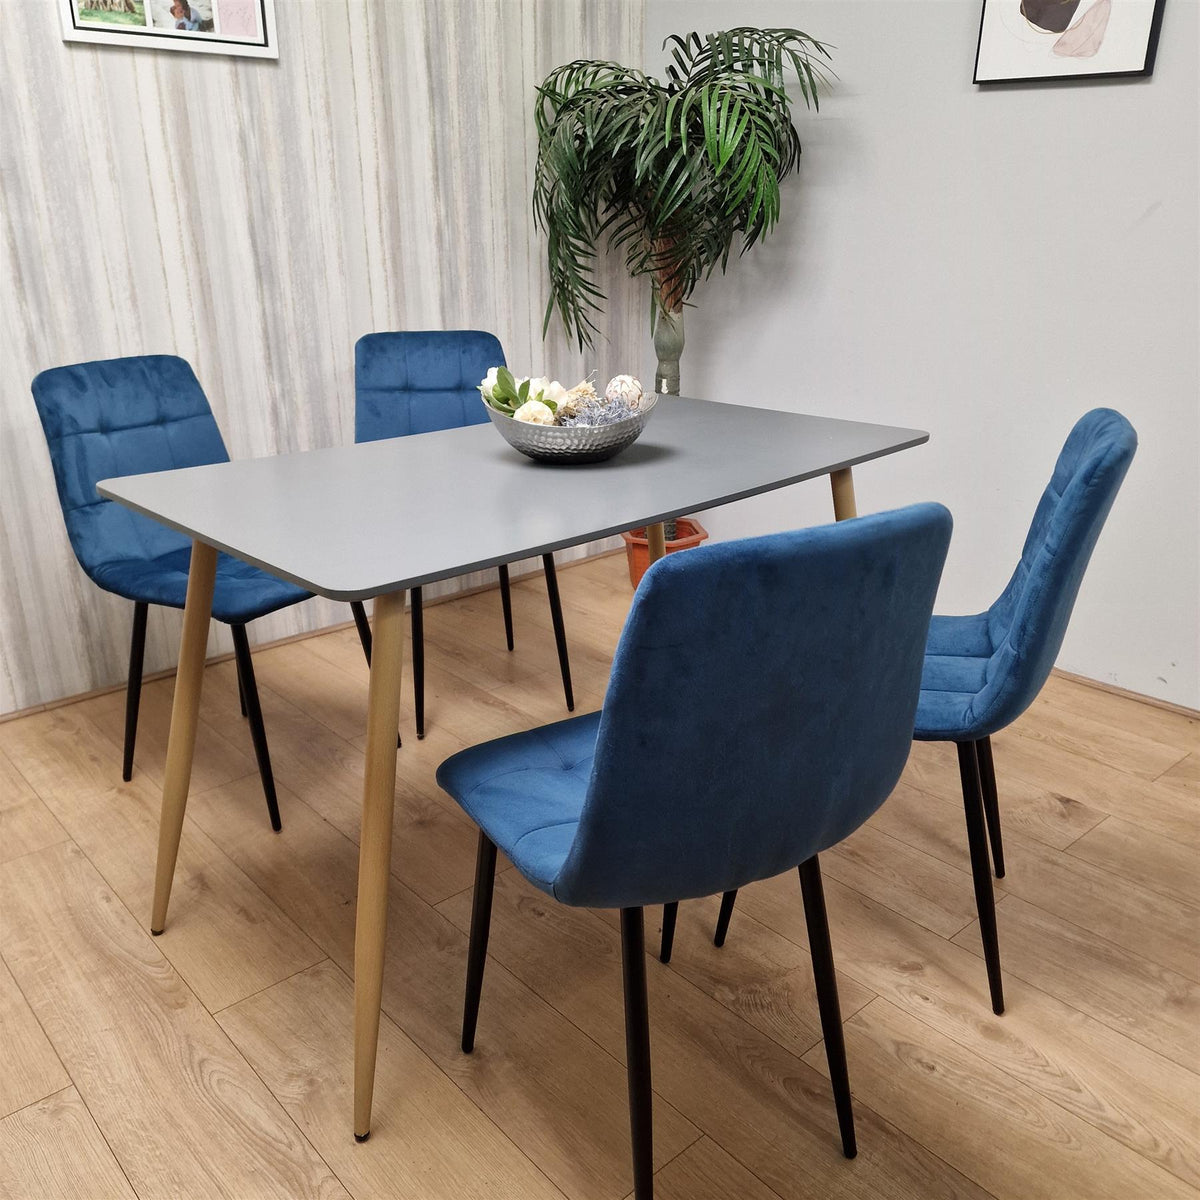 Wooden Dining Table Set for 4 Grey Wooden Table and 4 Blue Velvet Chairs